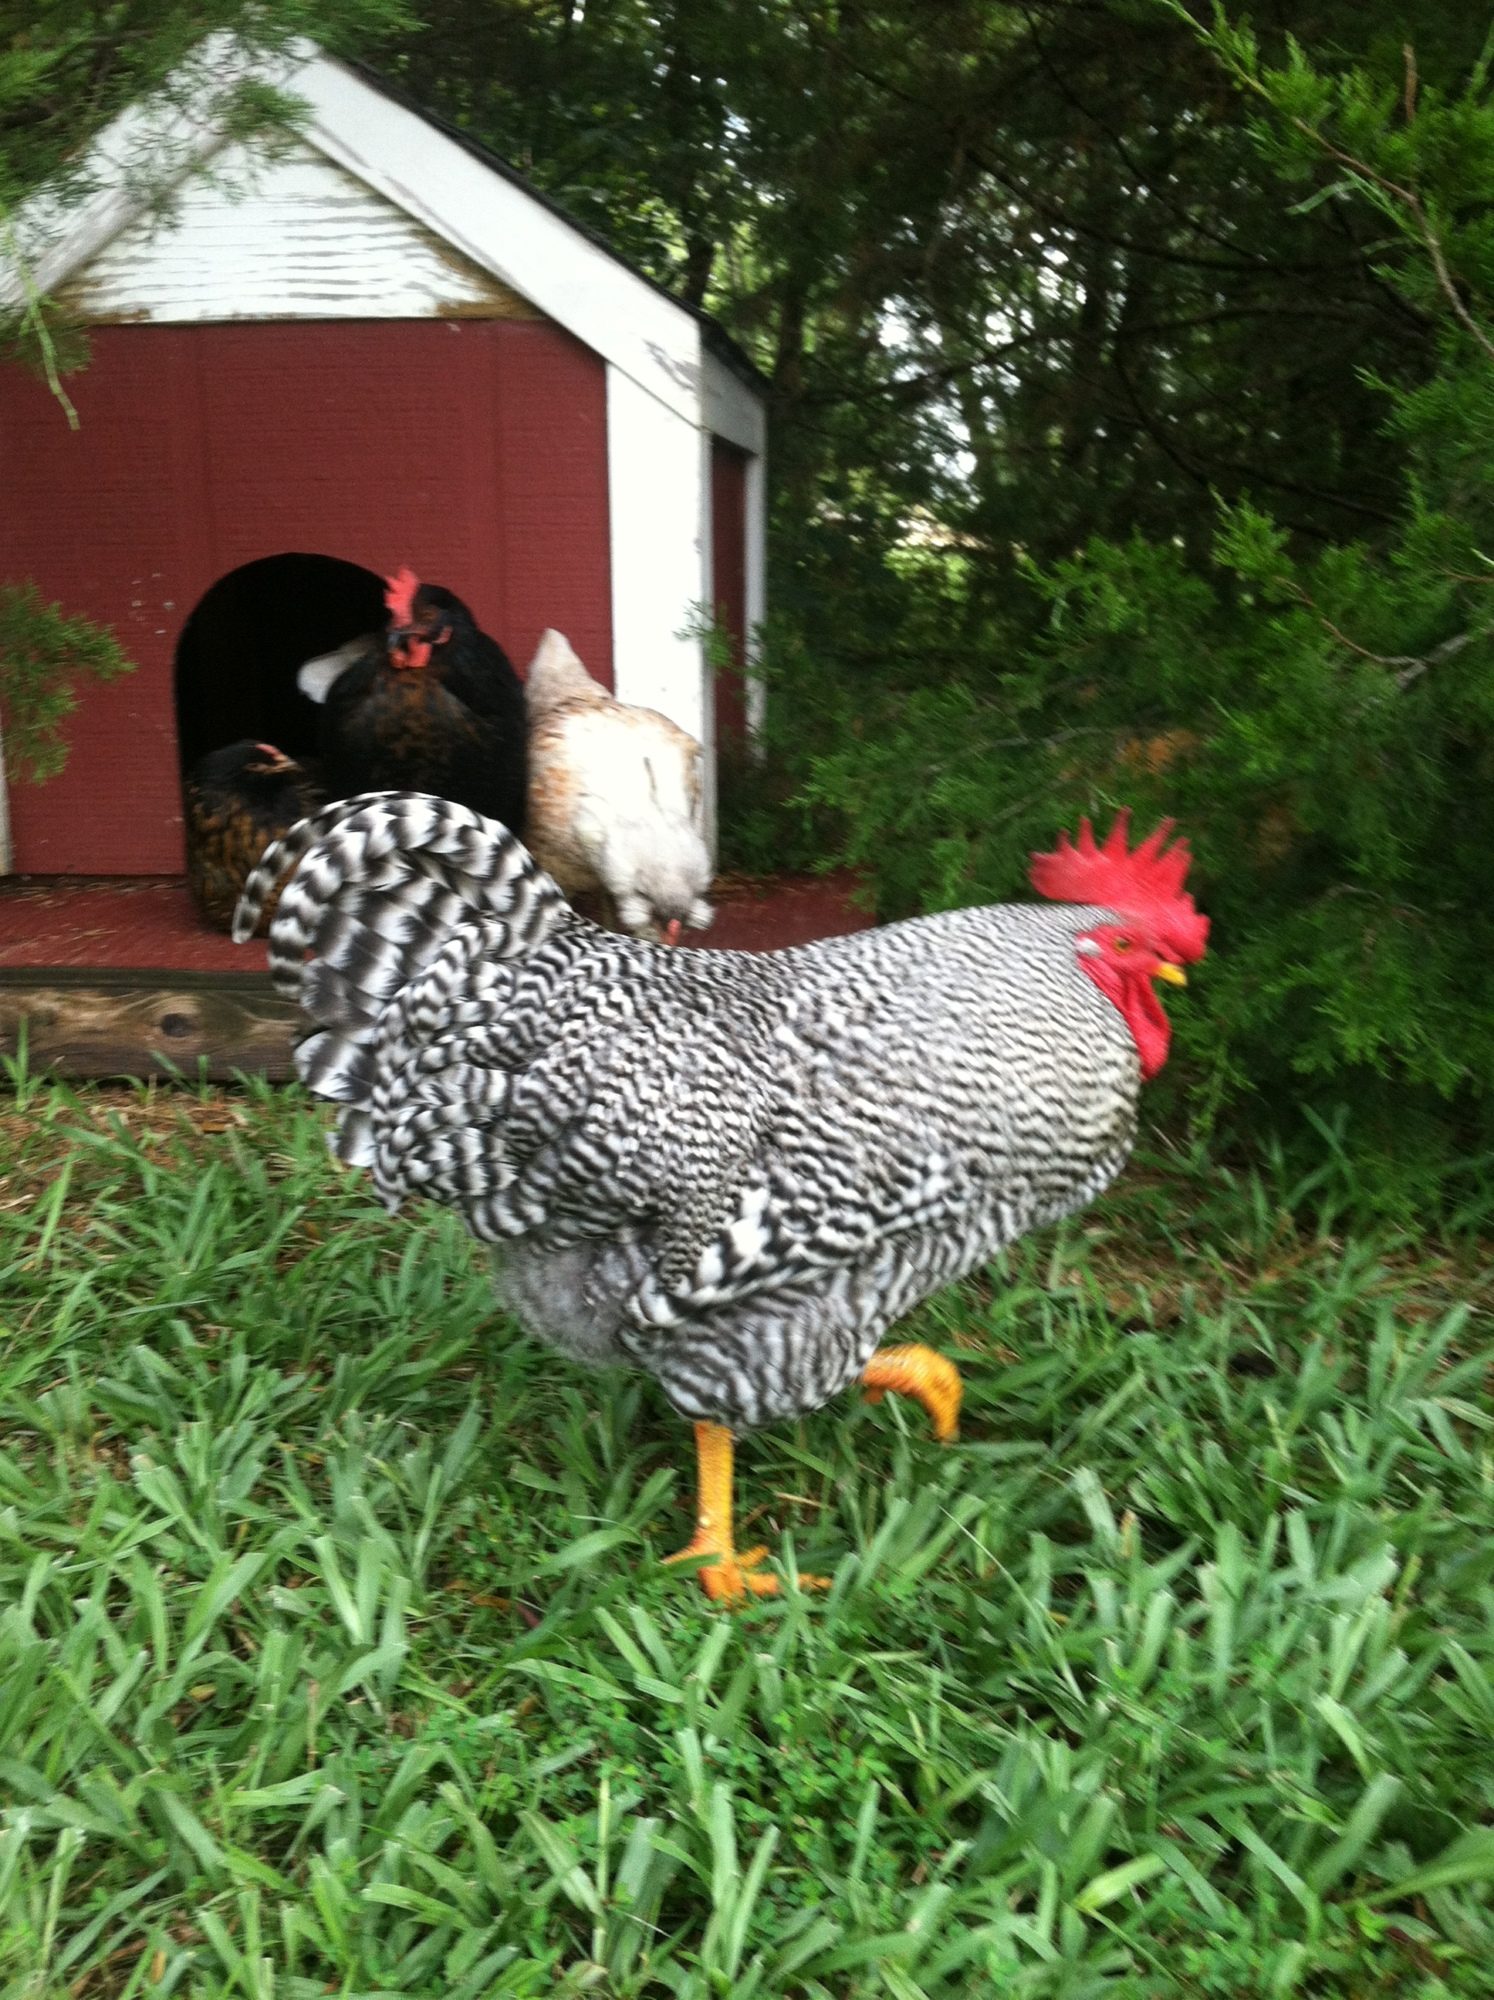 Mr. Rooster strutting his stuff. Age 6.5 months.